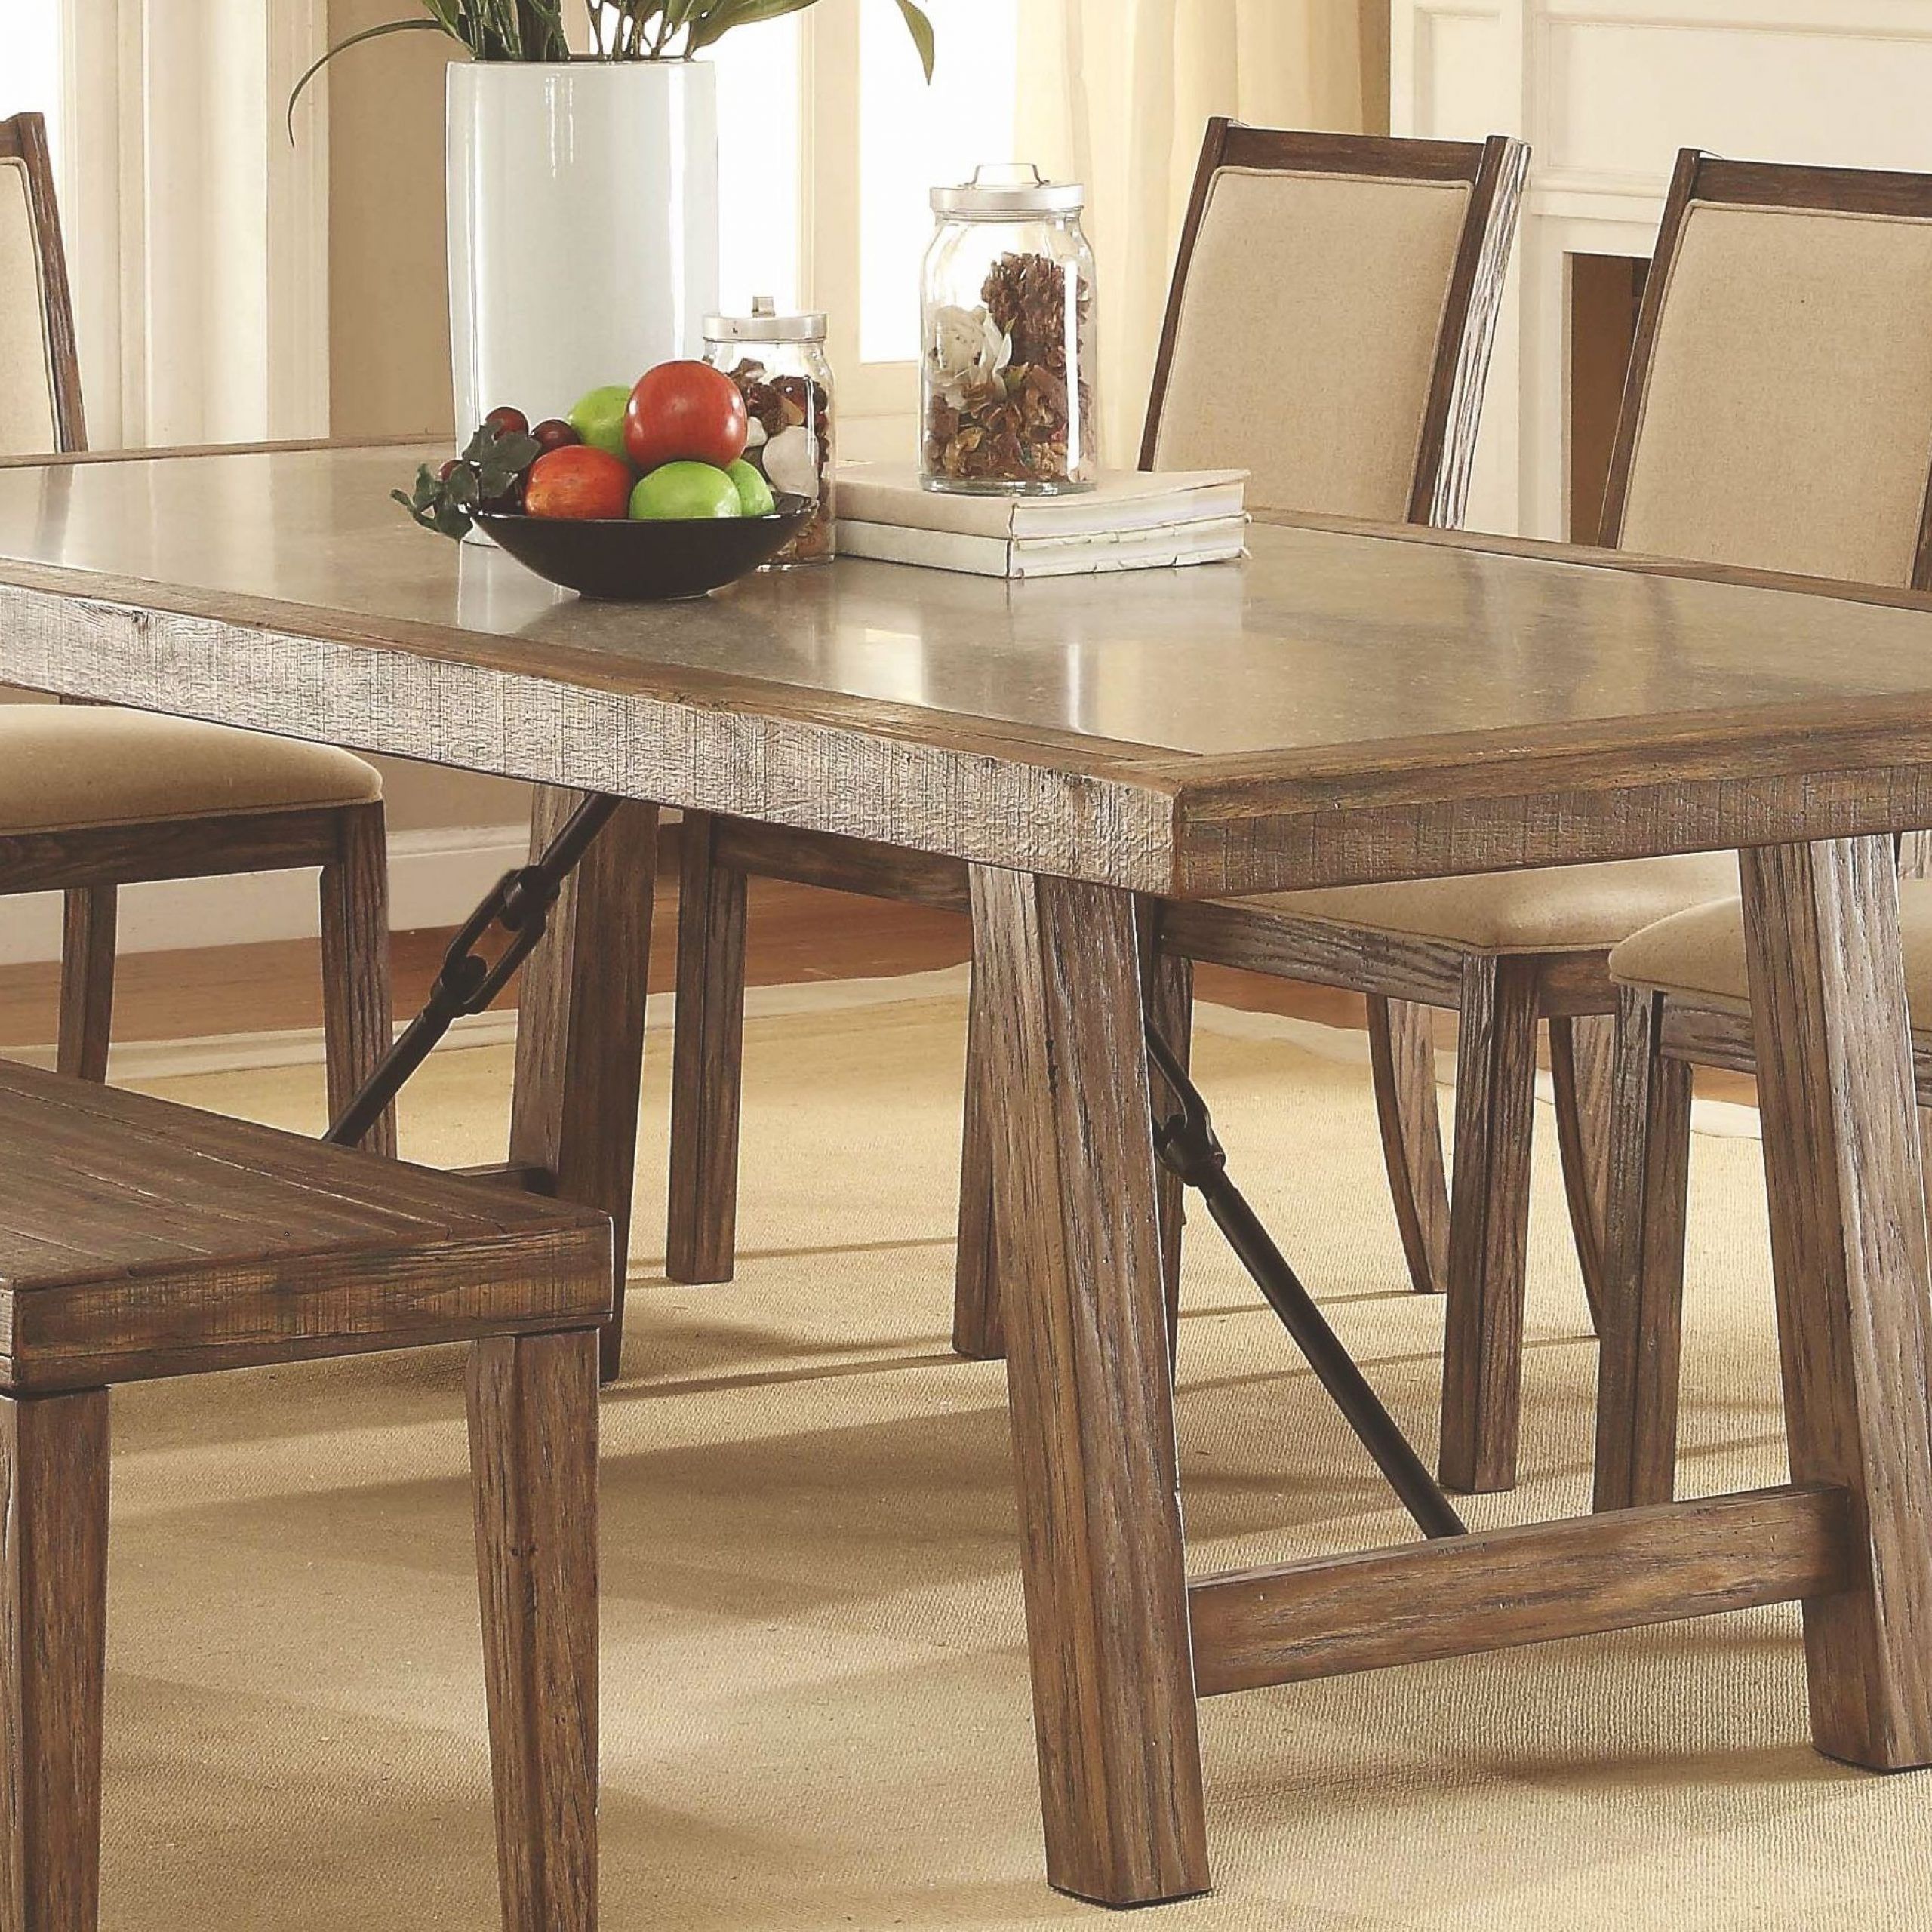 Natural Rectangle Dining Tables Intended For 2019 Colettte Rustic Oak Rectangular Dining Room Set From (View 15 of 15)